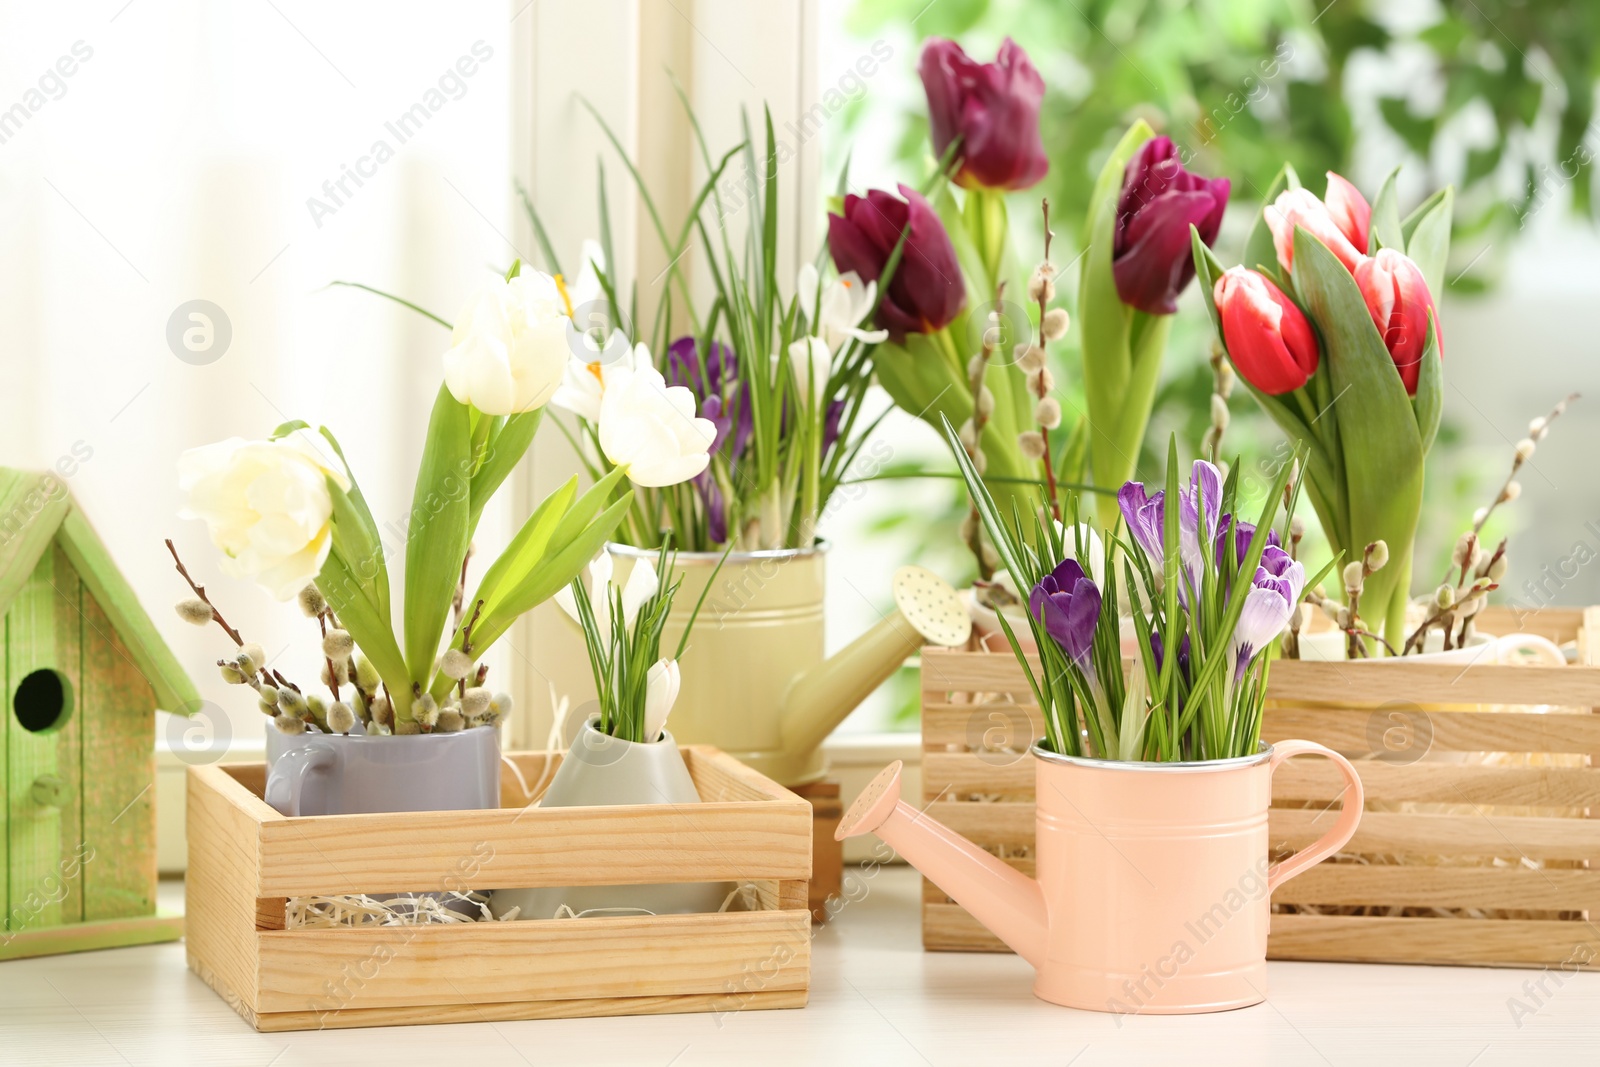 Photo of Different beautiful spring flowers with birdhouse on window sill